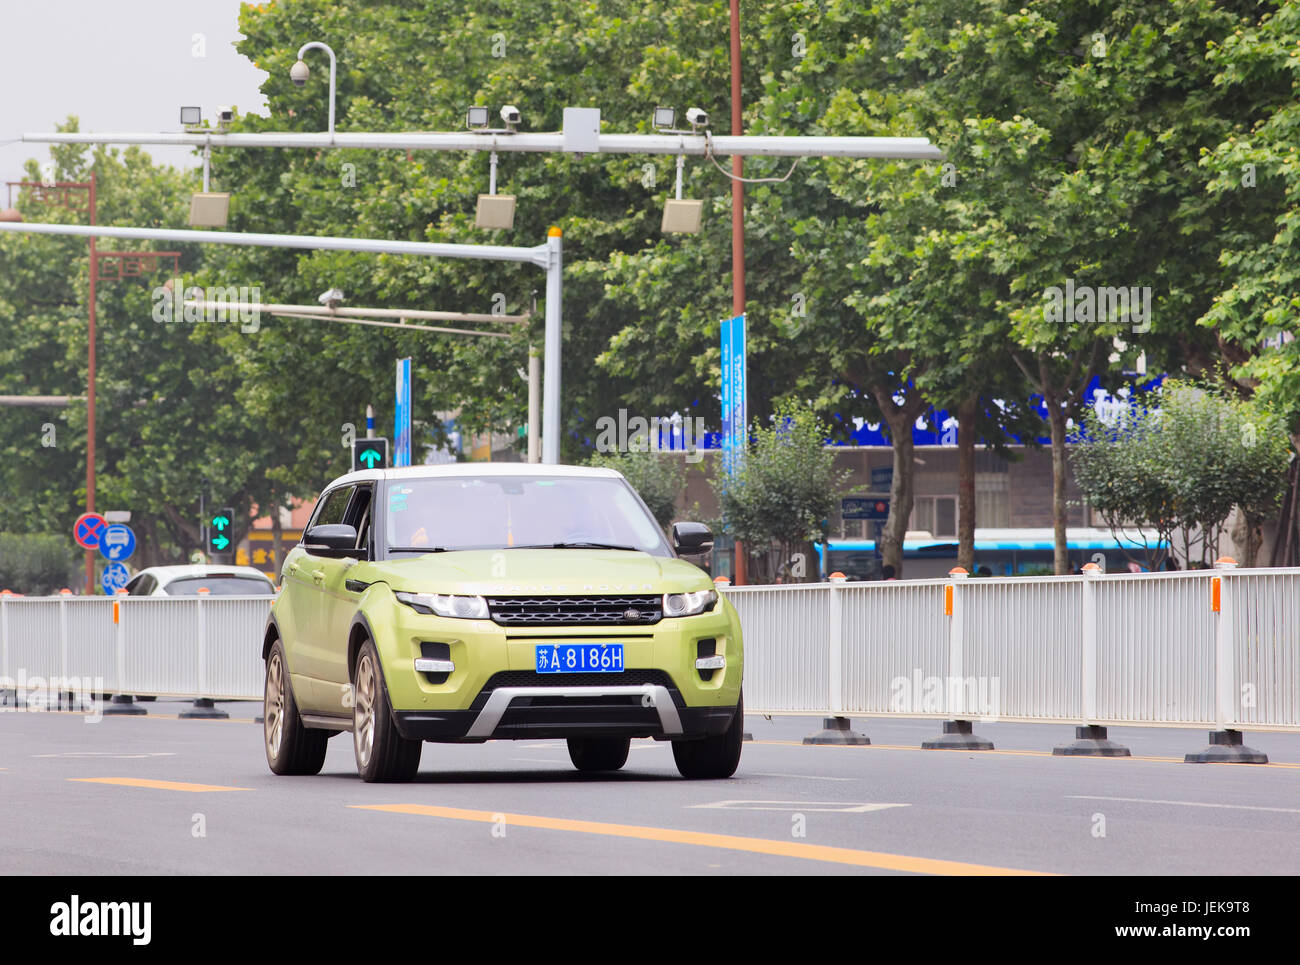 NANJING-MAY 25, 2014. Range Rover Evoque SUV downtown. Land Rover plans to complain to Chinese officials about the Landwind copy of its Evoque SUV. Stock Photo